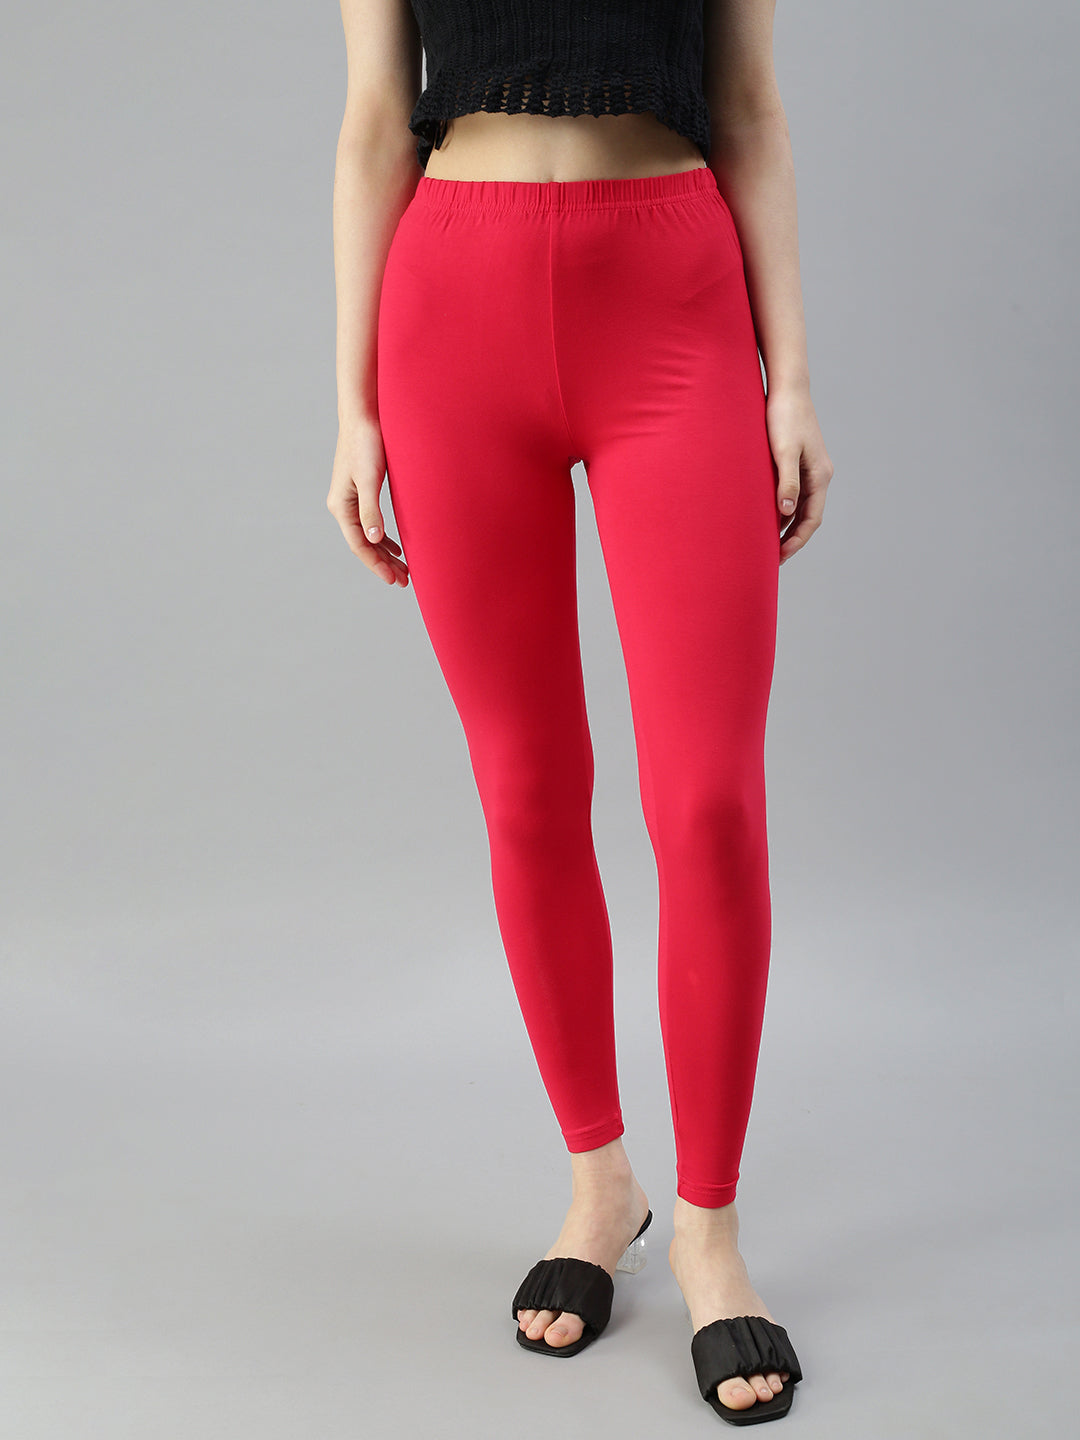 Prisma Shimmer leggings-S in Bangalore at best price by Rounaq Enterprises  - Justdial